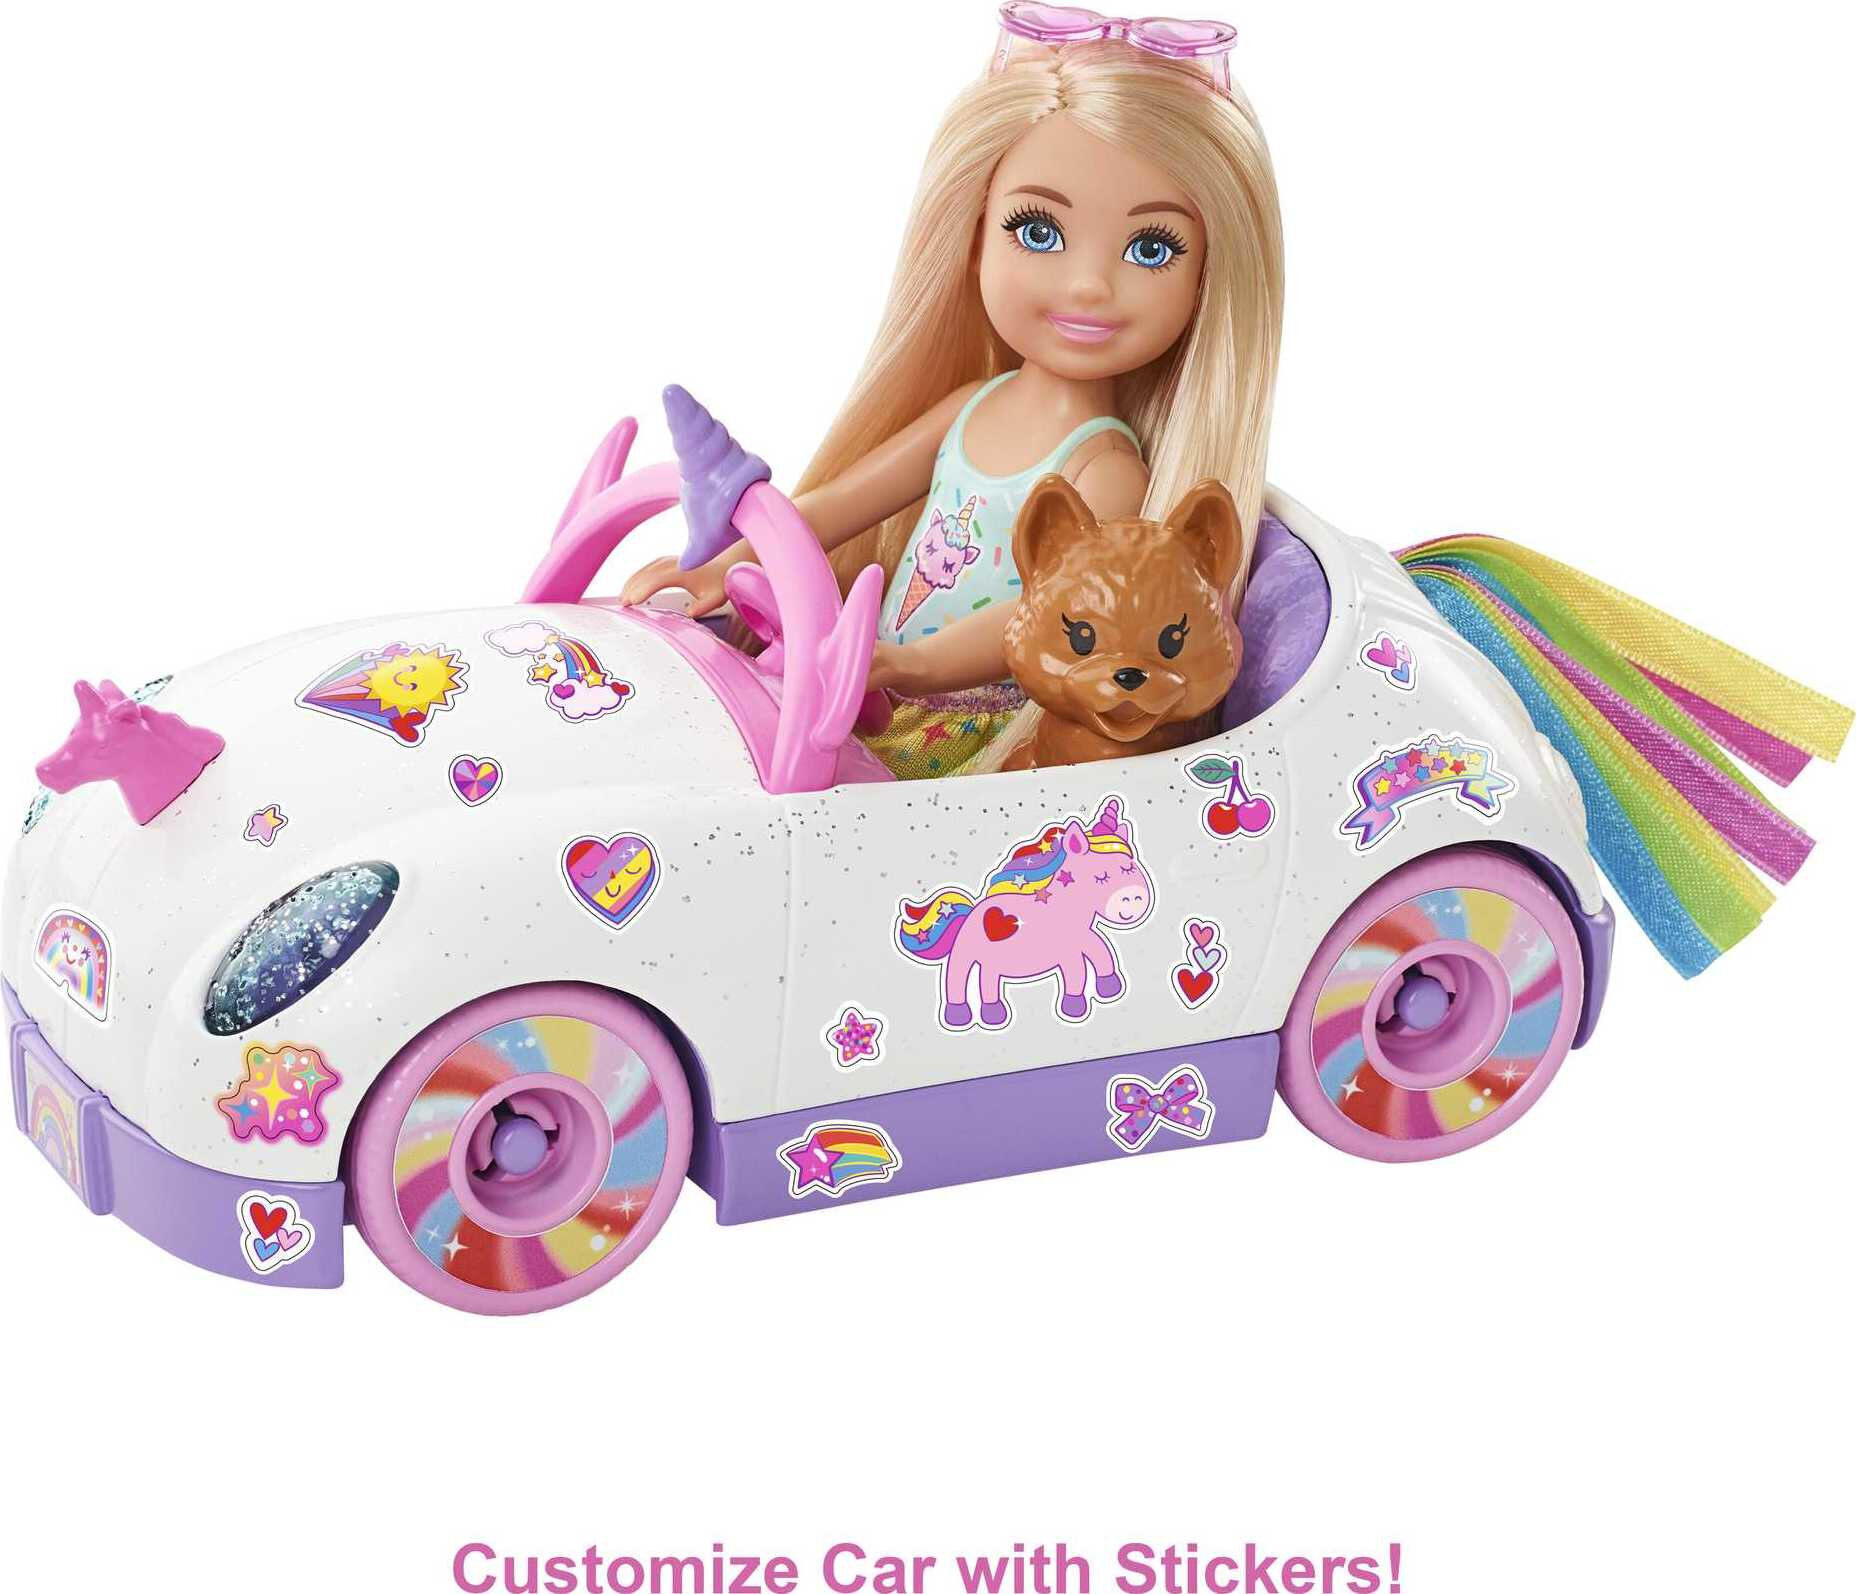 Barbie Club Chelsea Doll & Toy Car, Unicorn Theme, Blonde Small Doll, Puppy, Stickers & Accessories - image 4 of 6